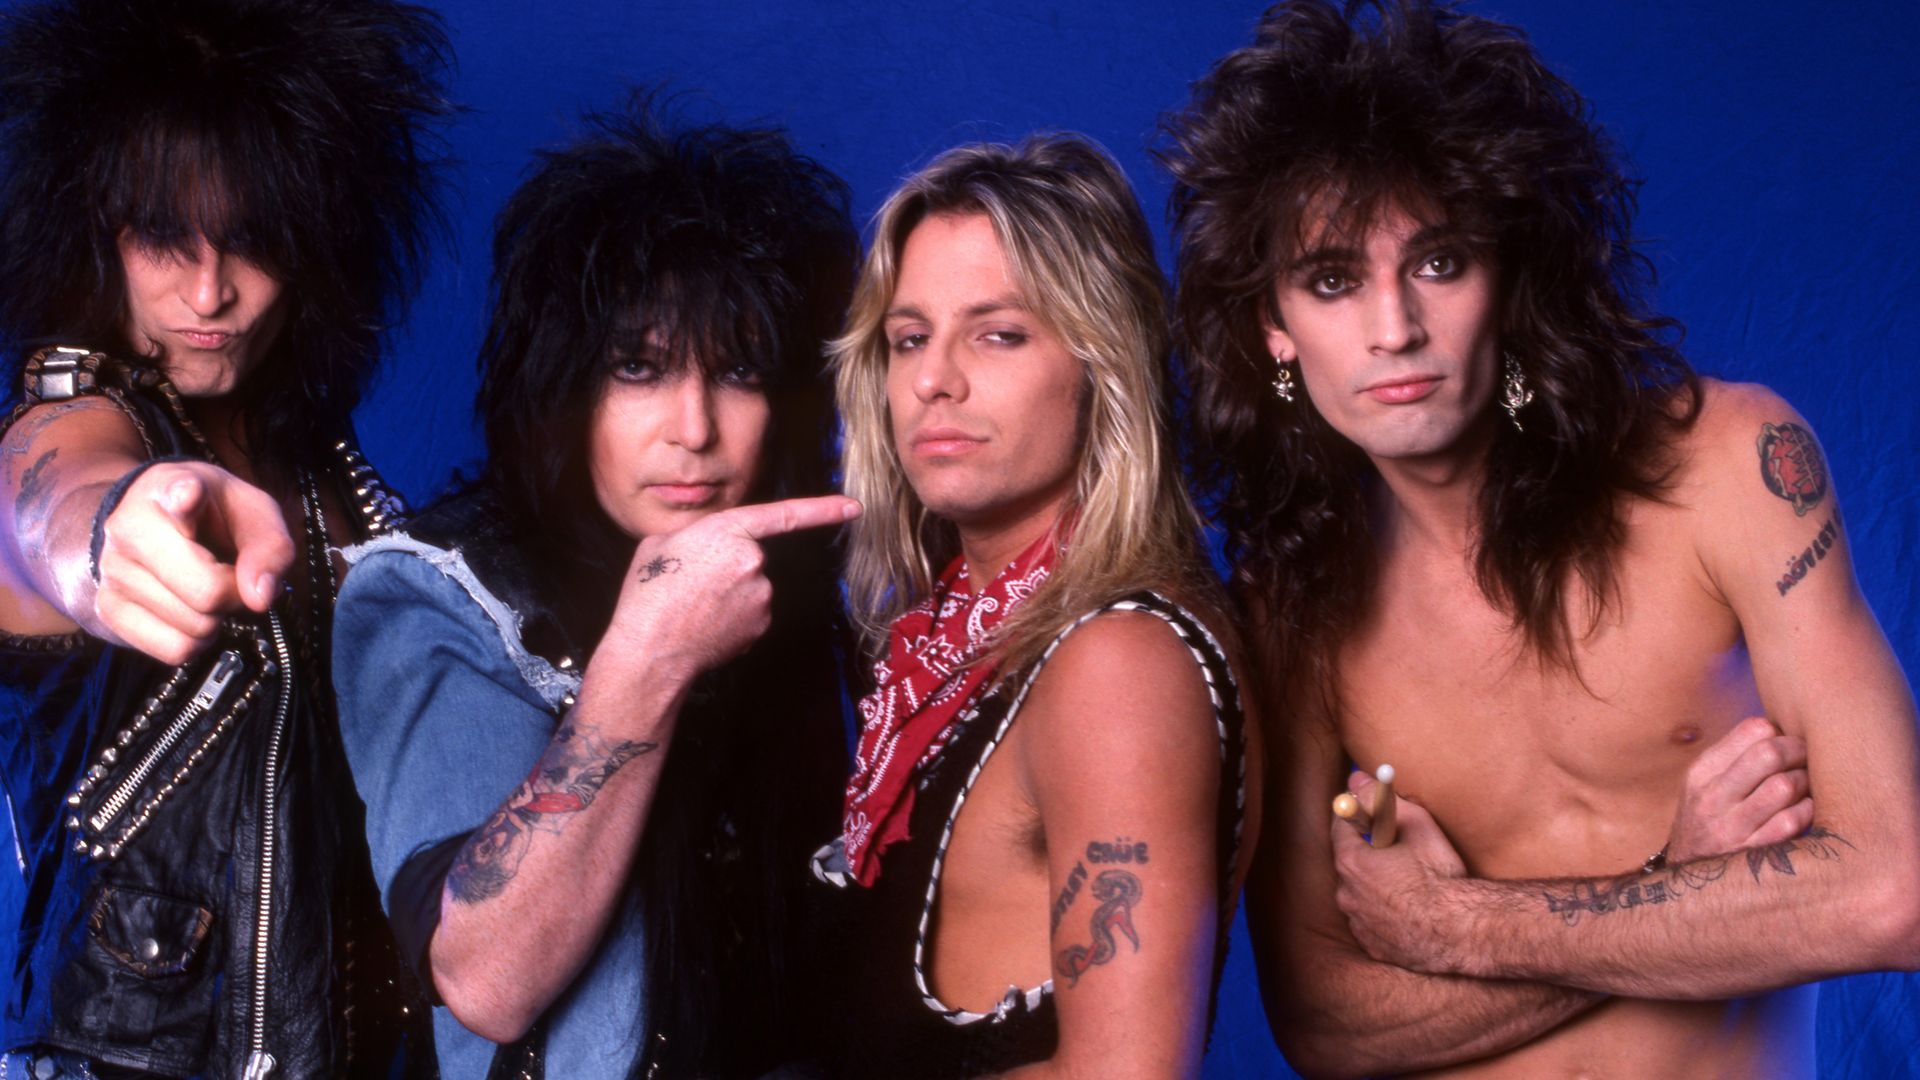 The members of Motley Crue pose for a picture.